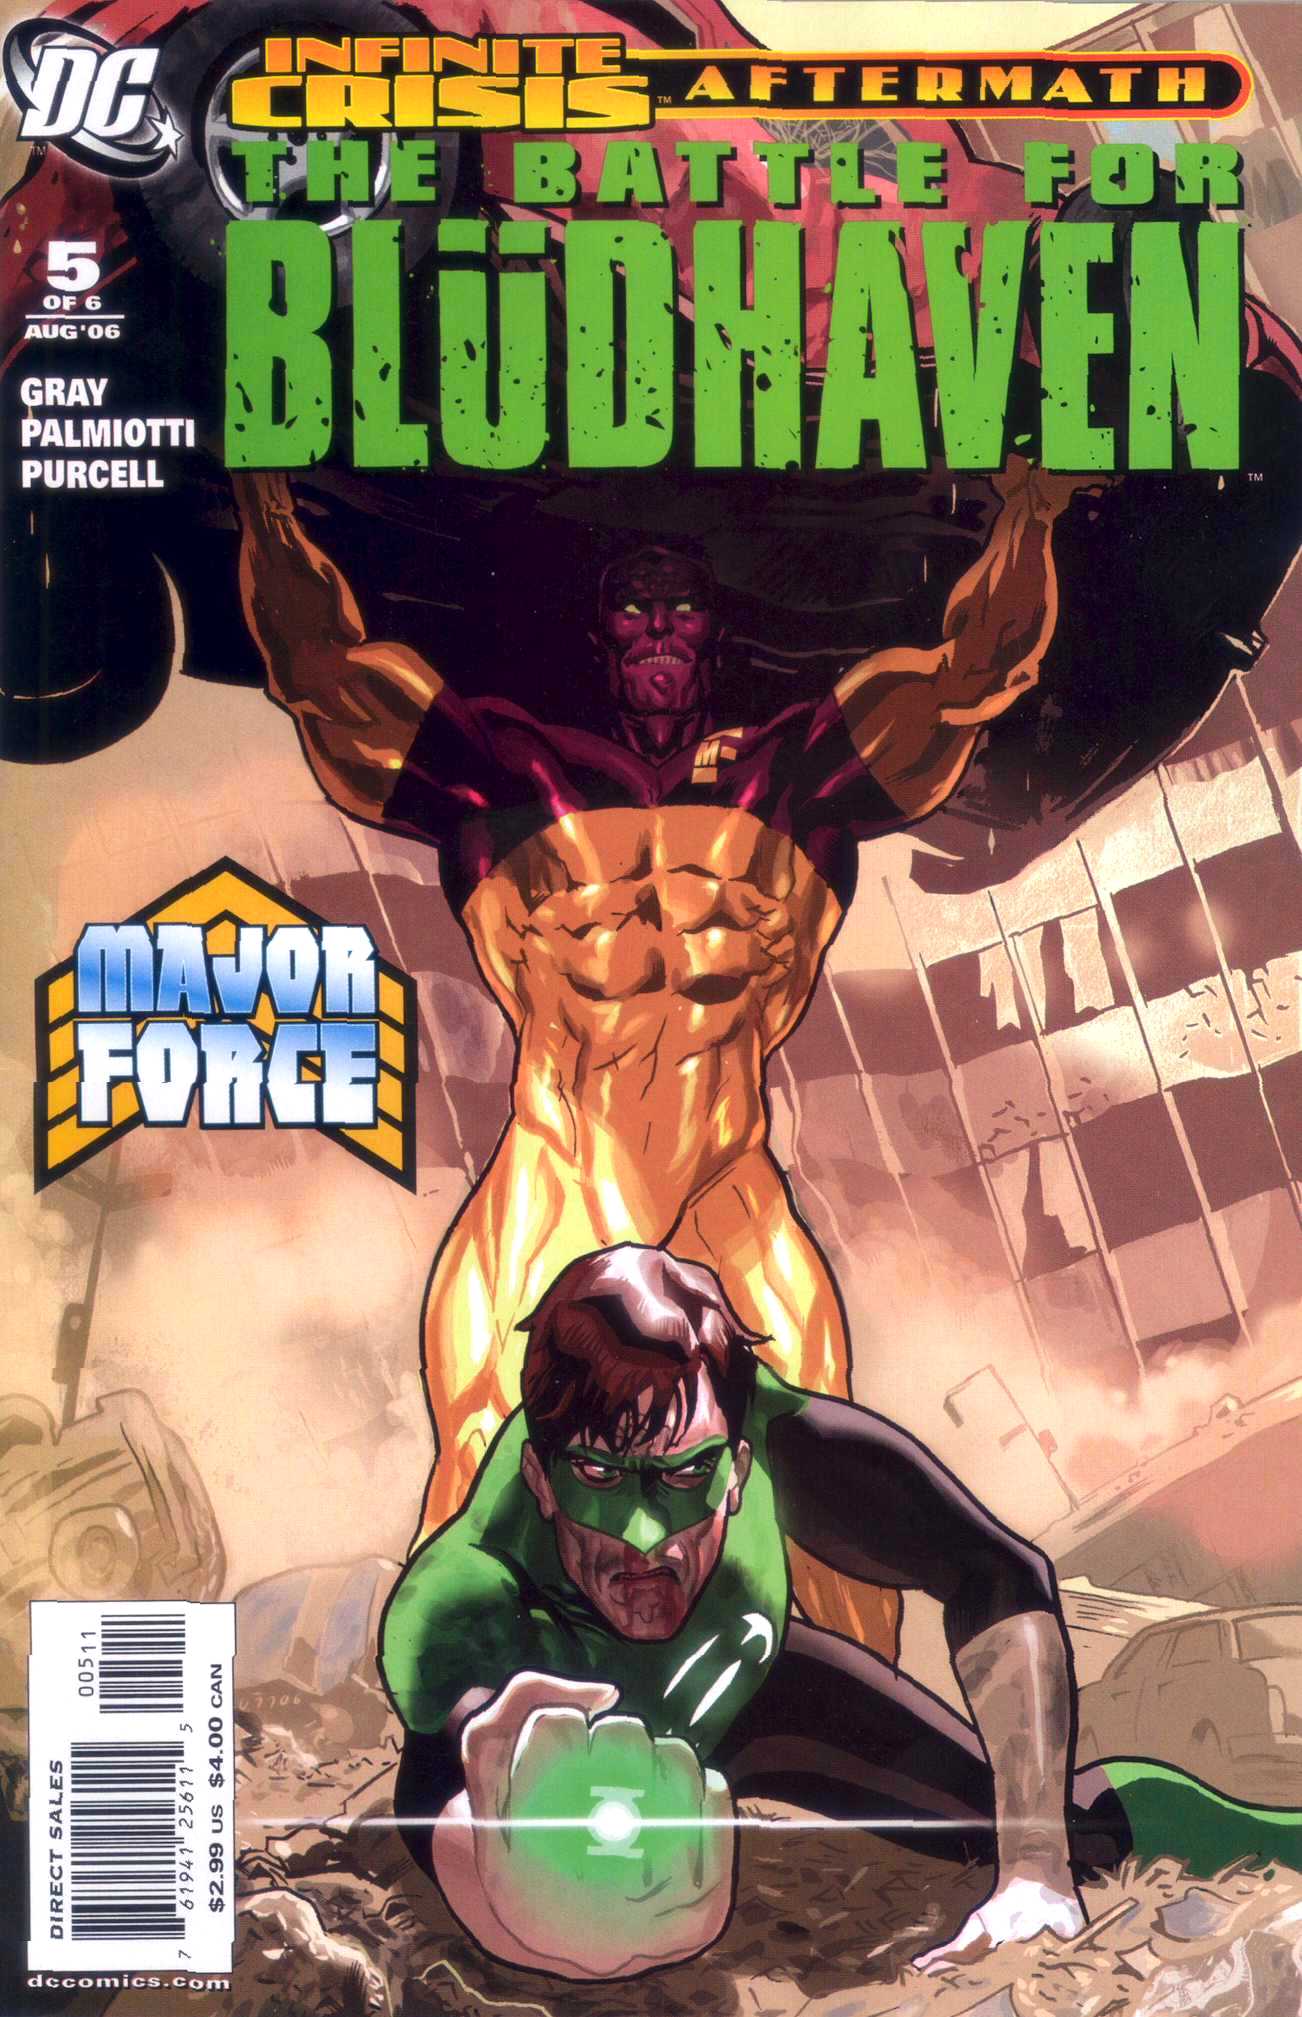 Read online Crisis Aftermath: The Battle for Bludhaven comic -  Issue #5 - 1